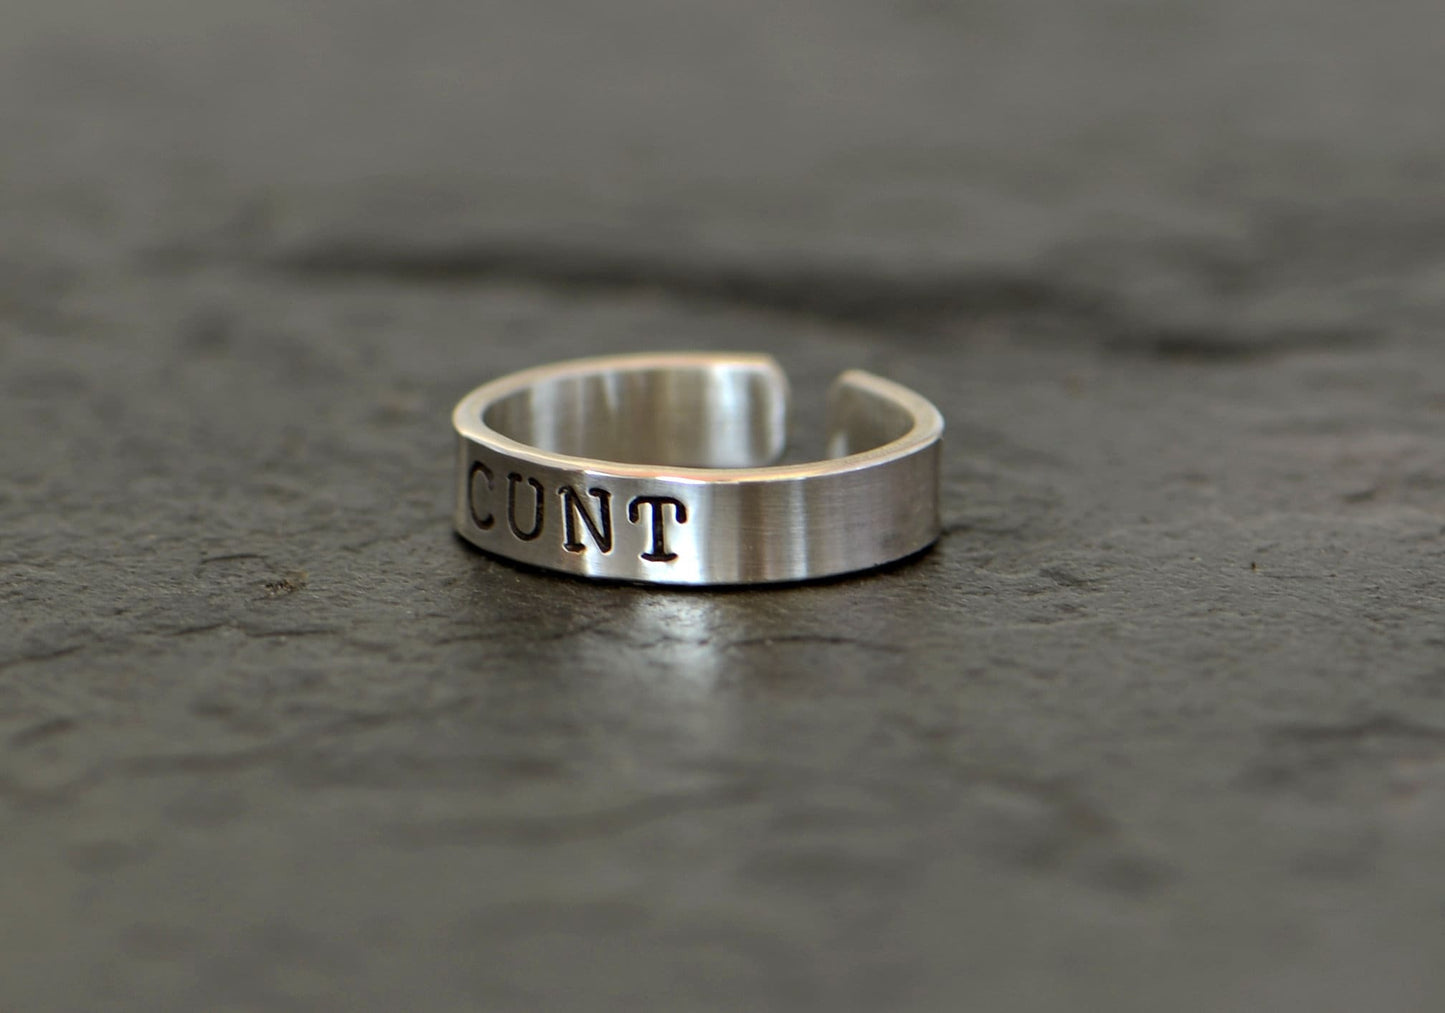 Sterling silver cunt toe ring